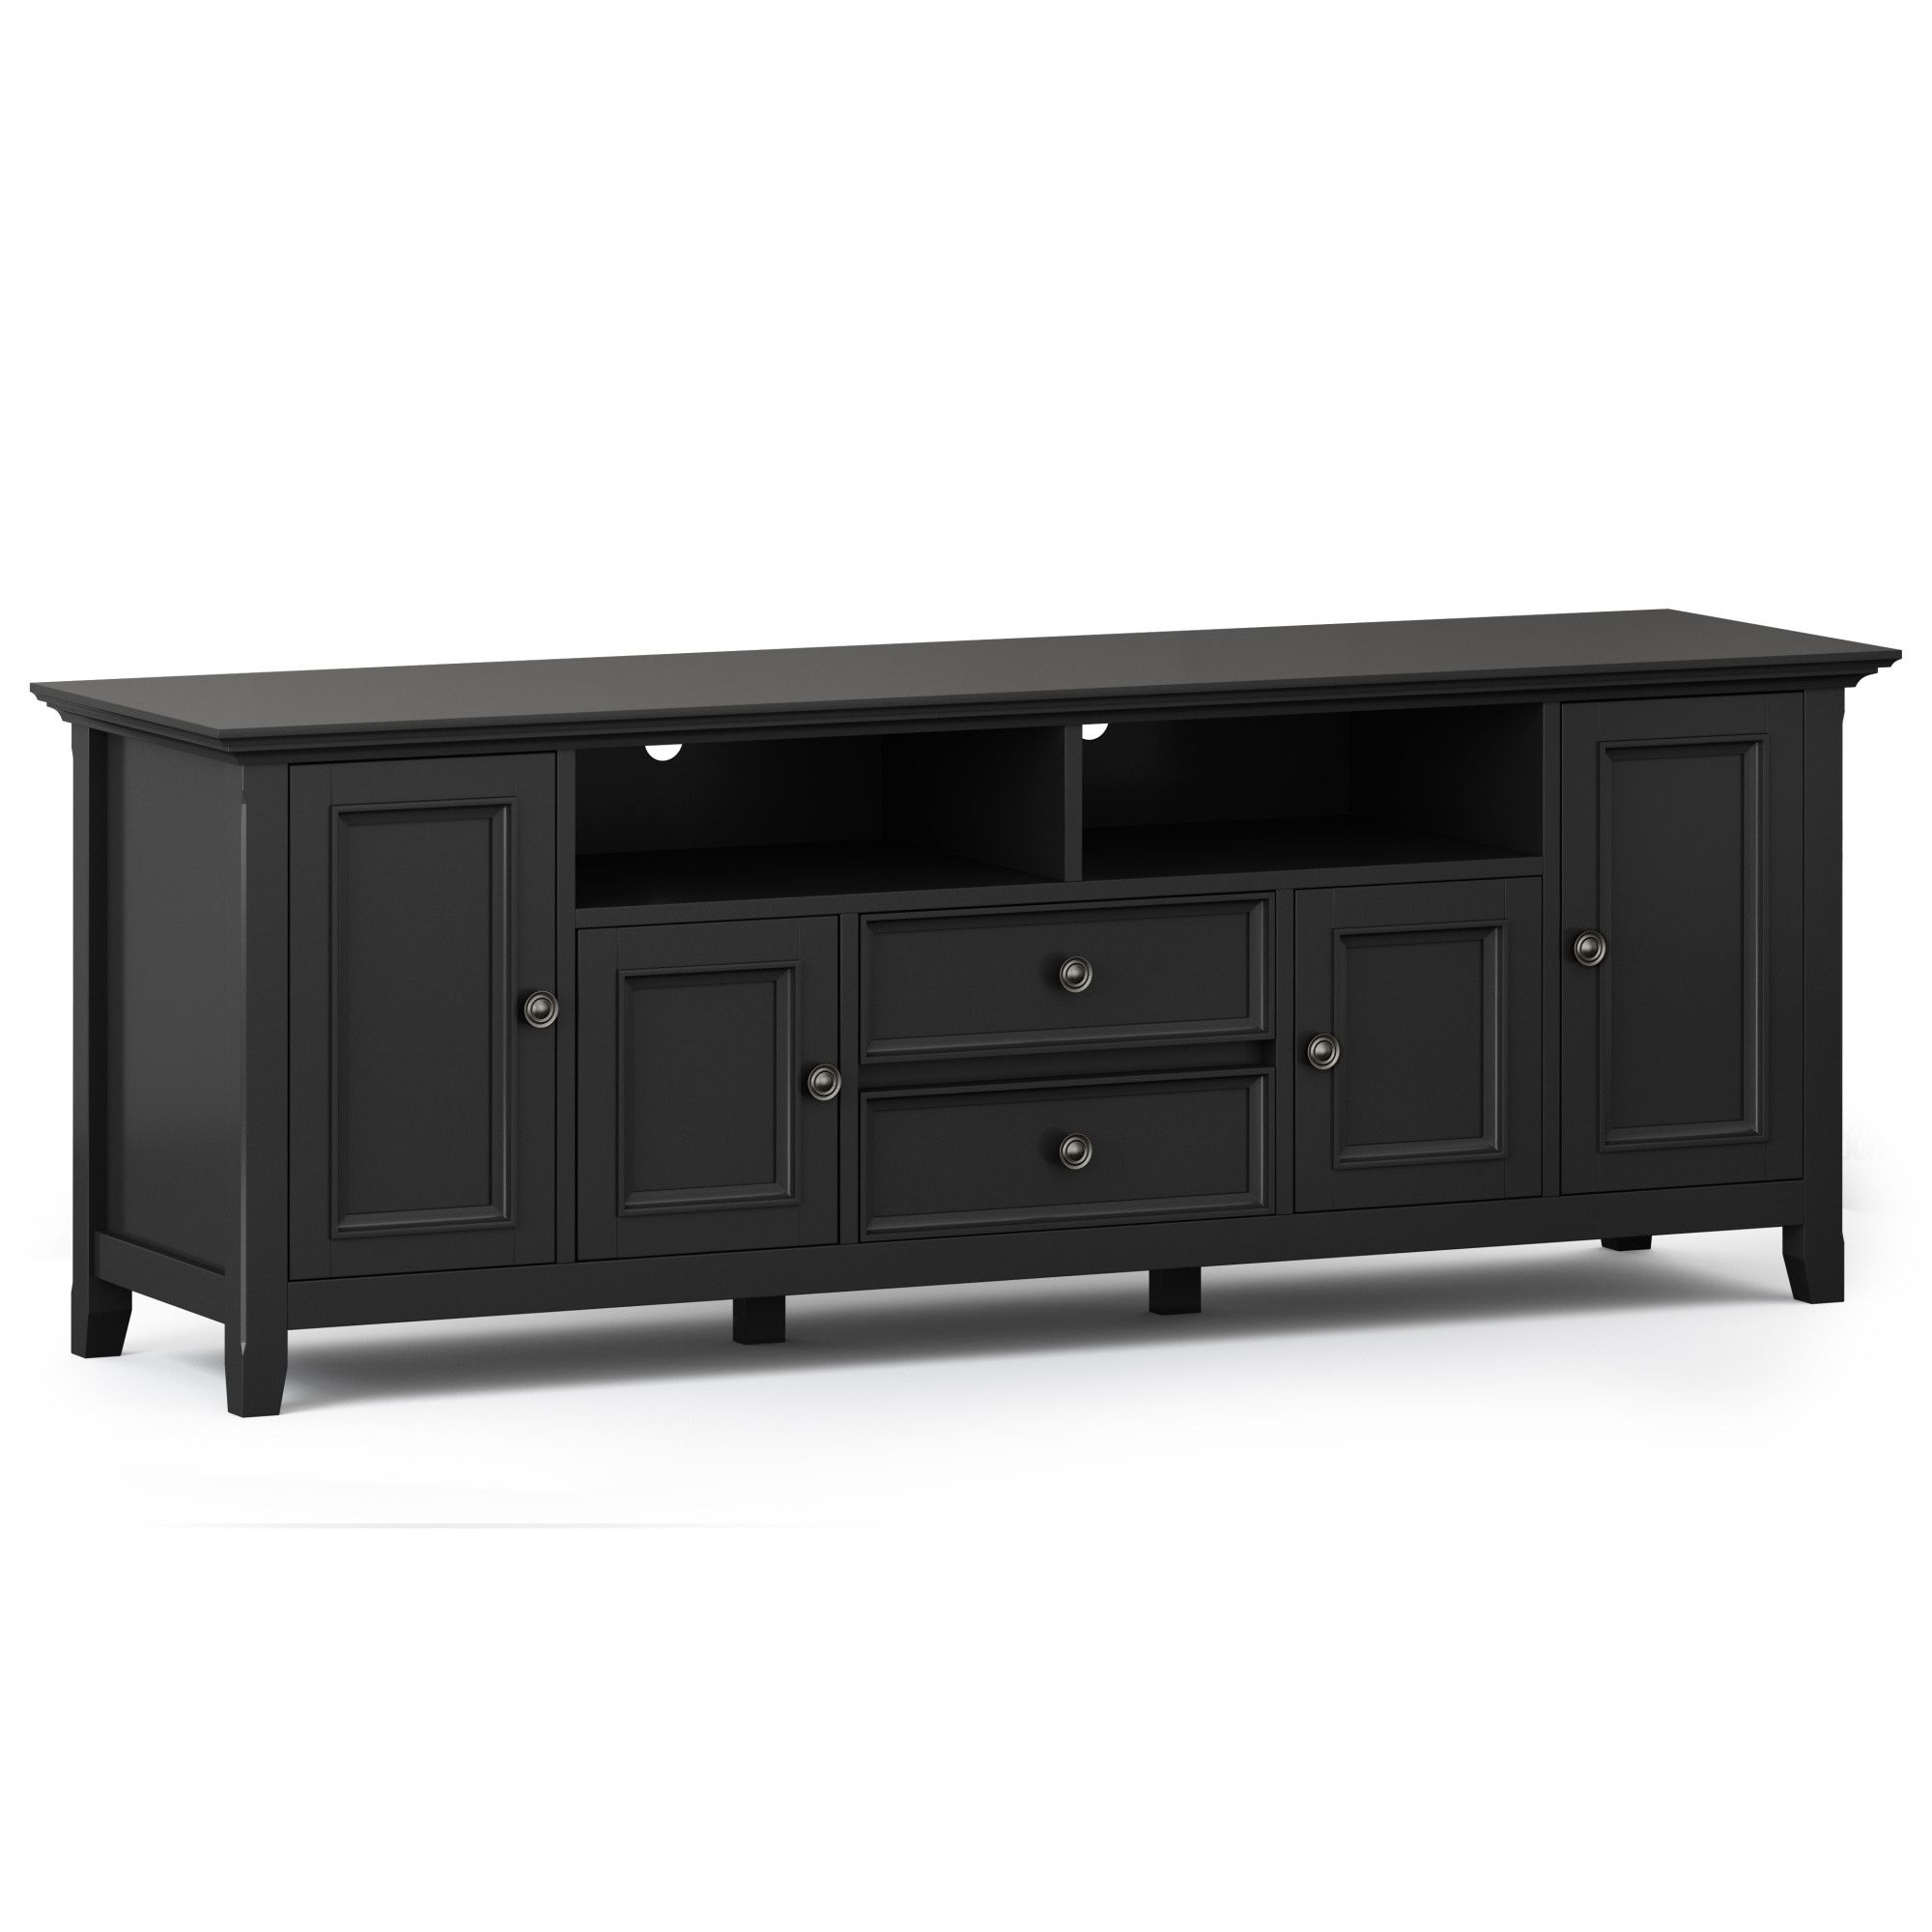 Brooklyn + Max Washington Solid Wood 72 Inch Wide Inside Carbon Extra Wide Tv Unit Stands (View 14 of 20)